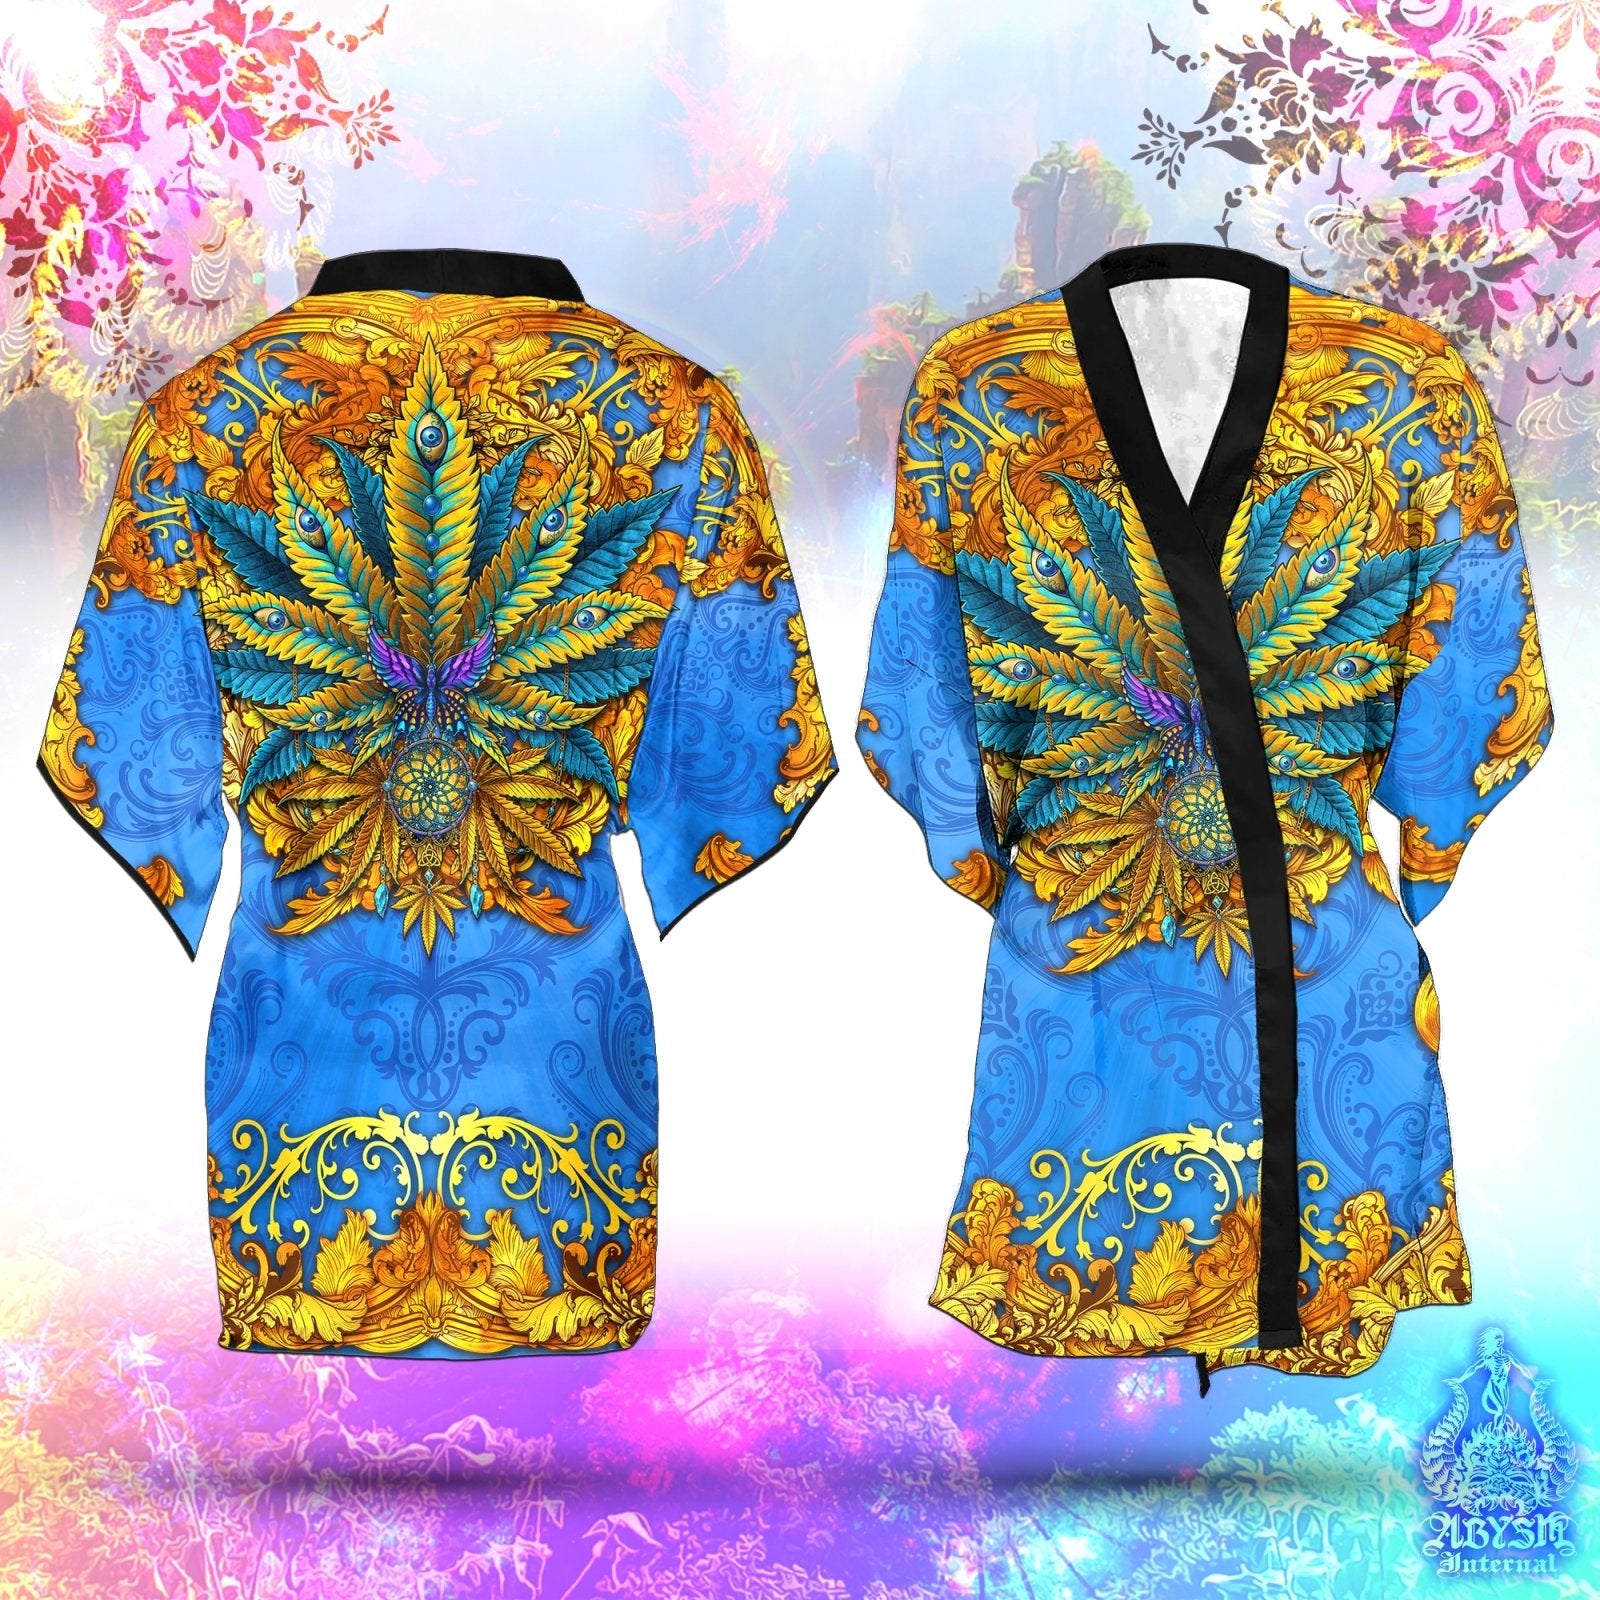 Cannabis Cover Up, Weed Outfit, Indie Party Kimono, Hippie Summer Festival Robe, 420 Gift, Alternative Clothing, Unisex - Marijuana, Cyan and Gold - Abysm Internal